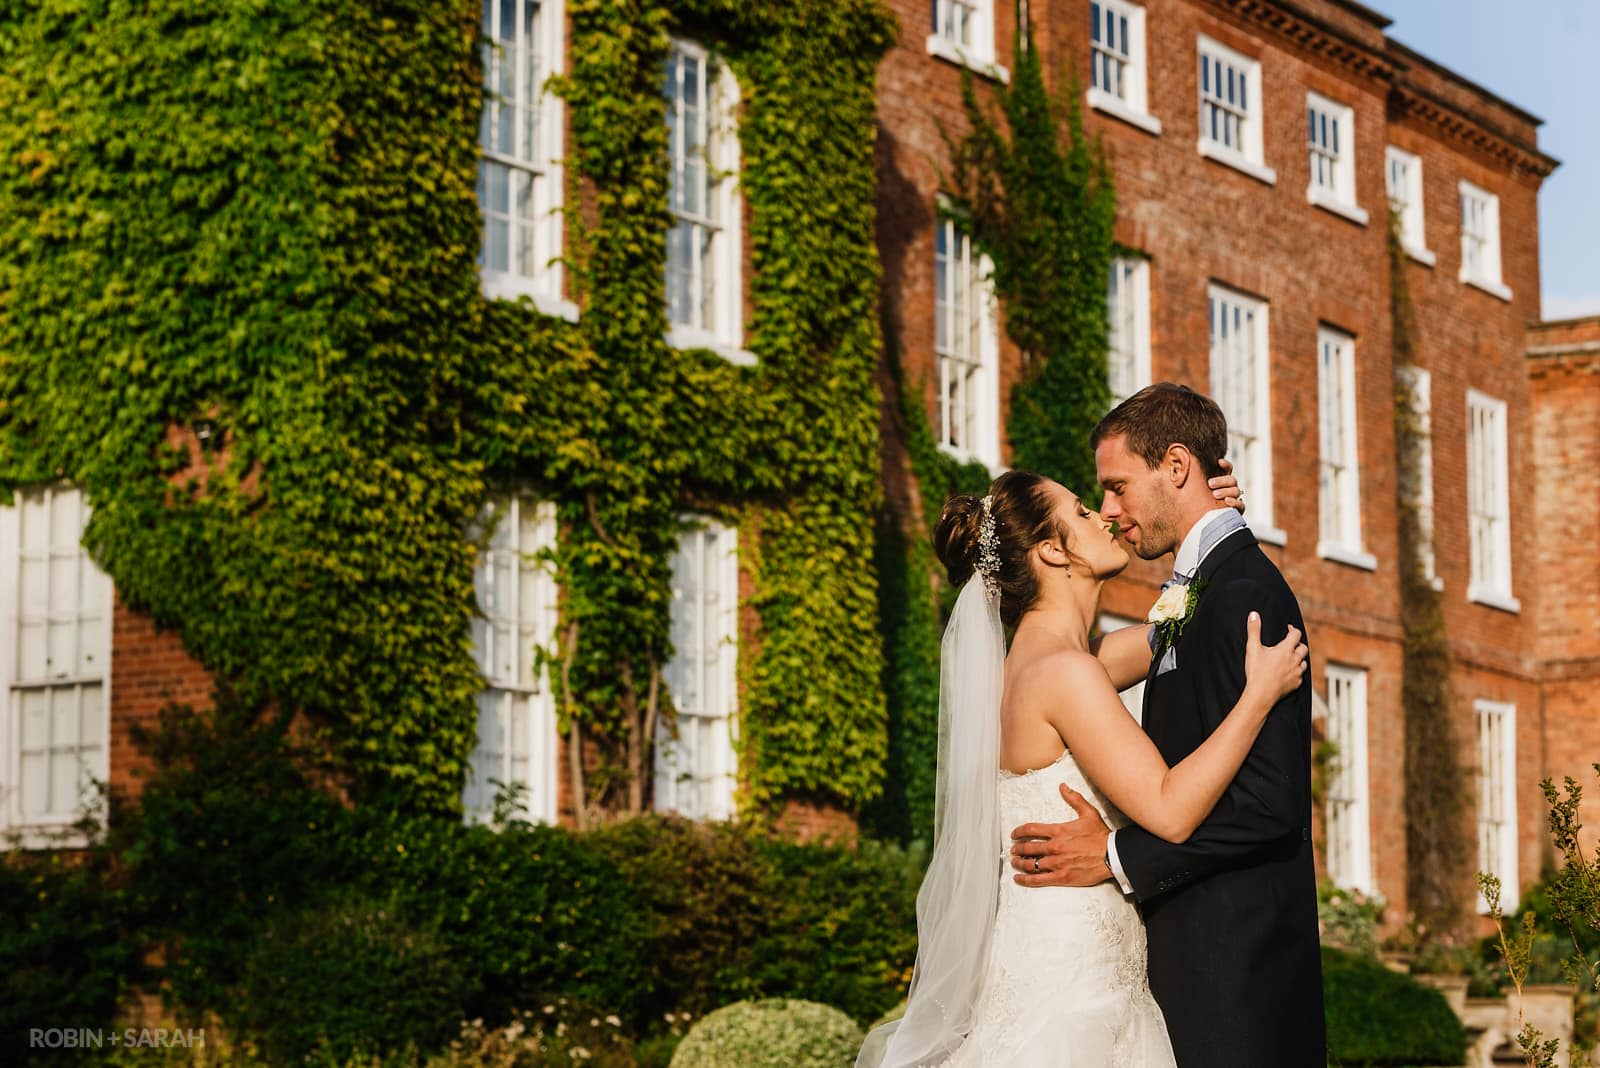 Bride and groom about to kiss in front of Delbury Hall